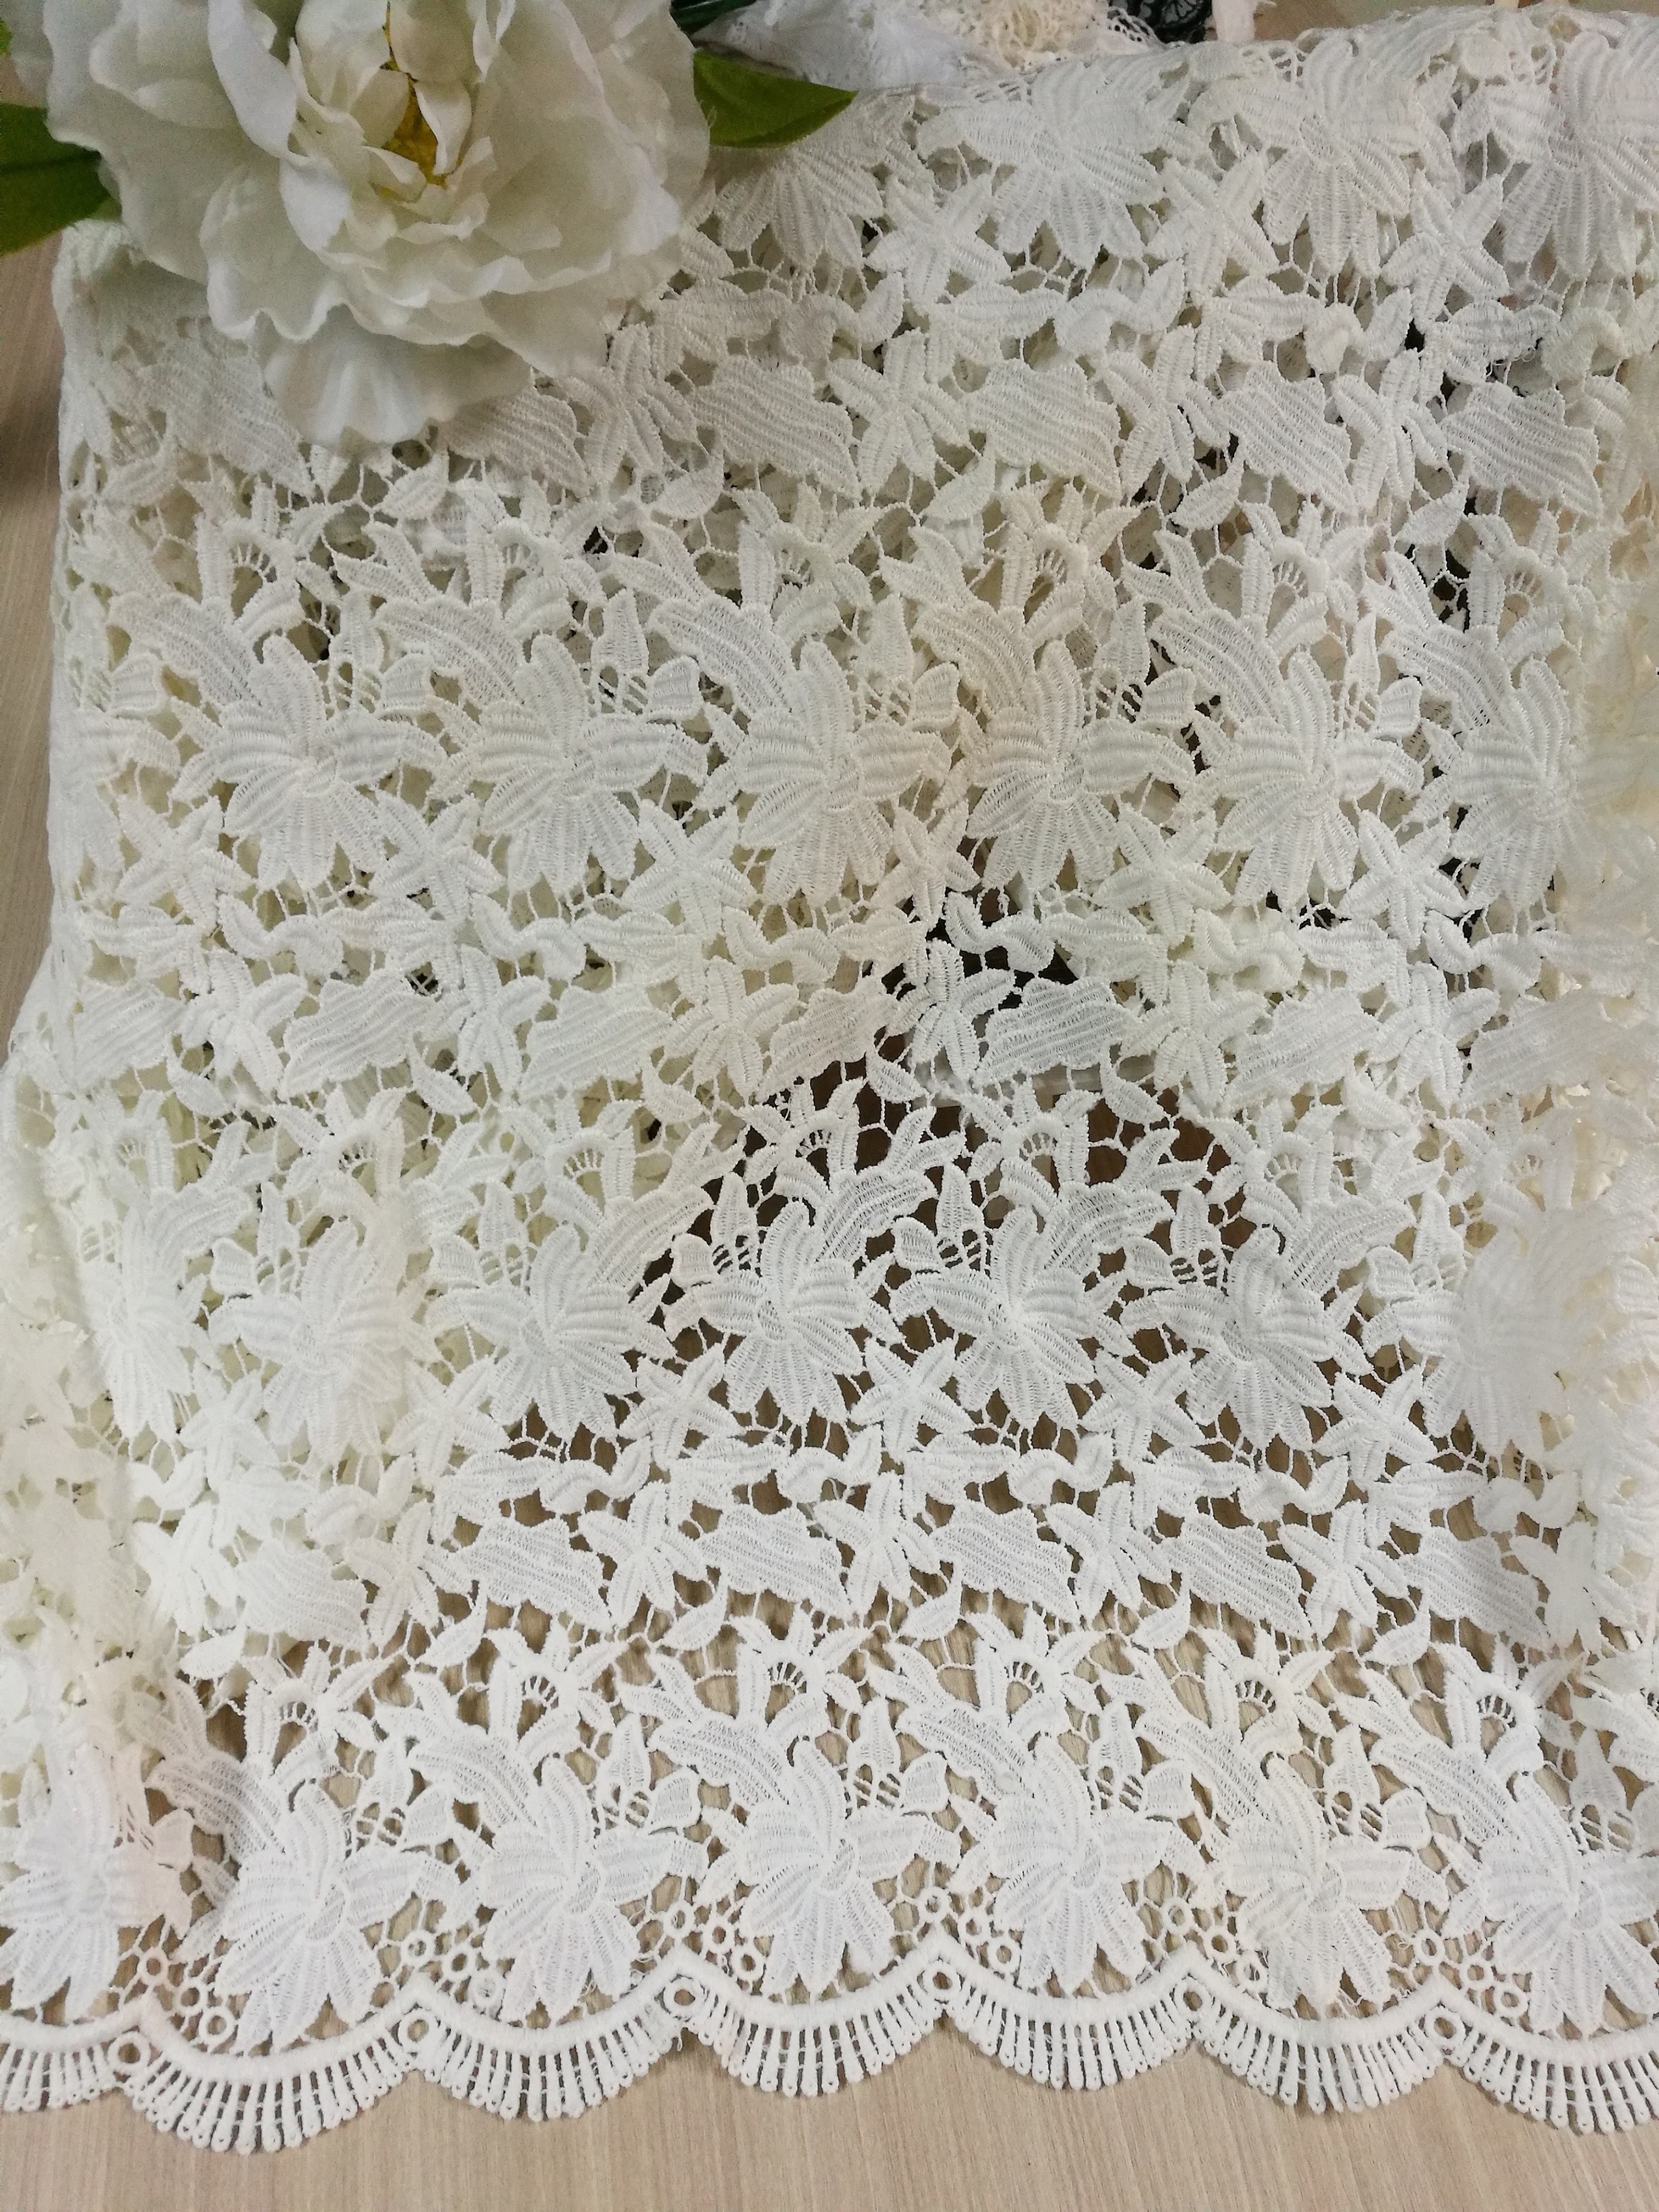  120cm Allover Lace Fabric Embroidery Multipattern OEKO TEX 100 Approved Manufactures